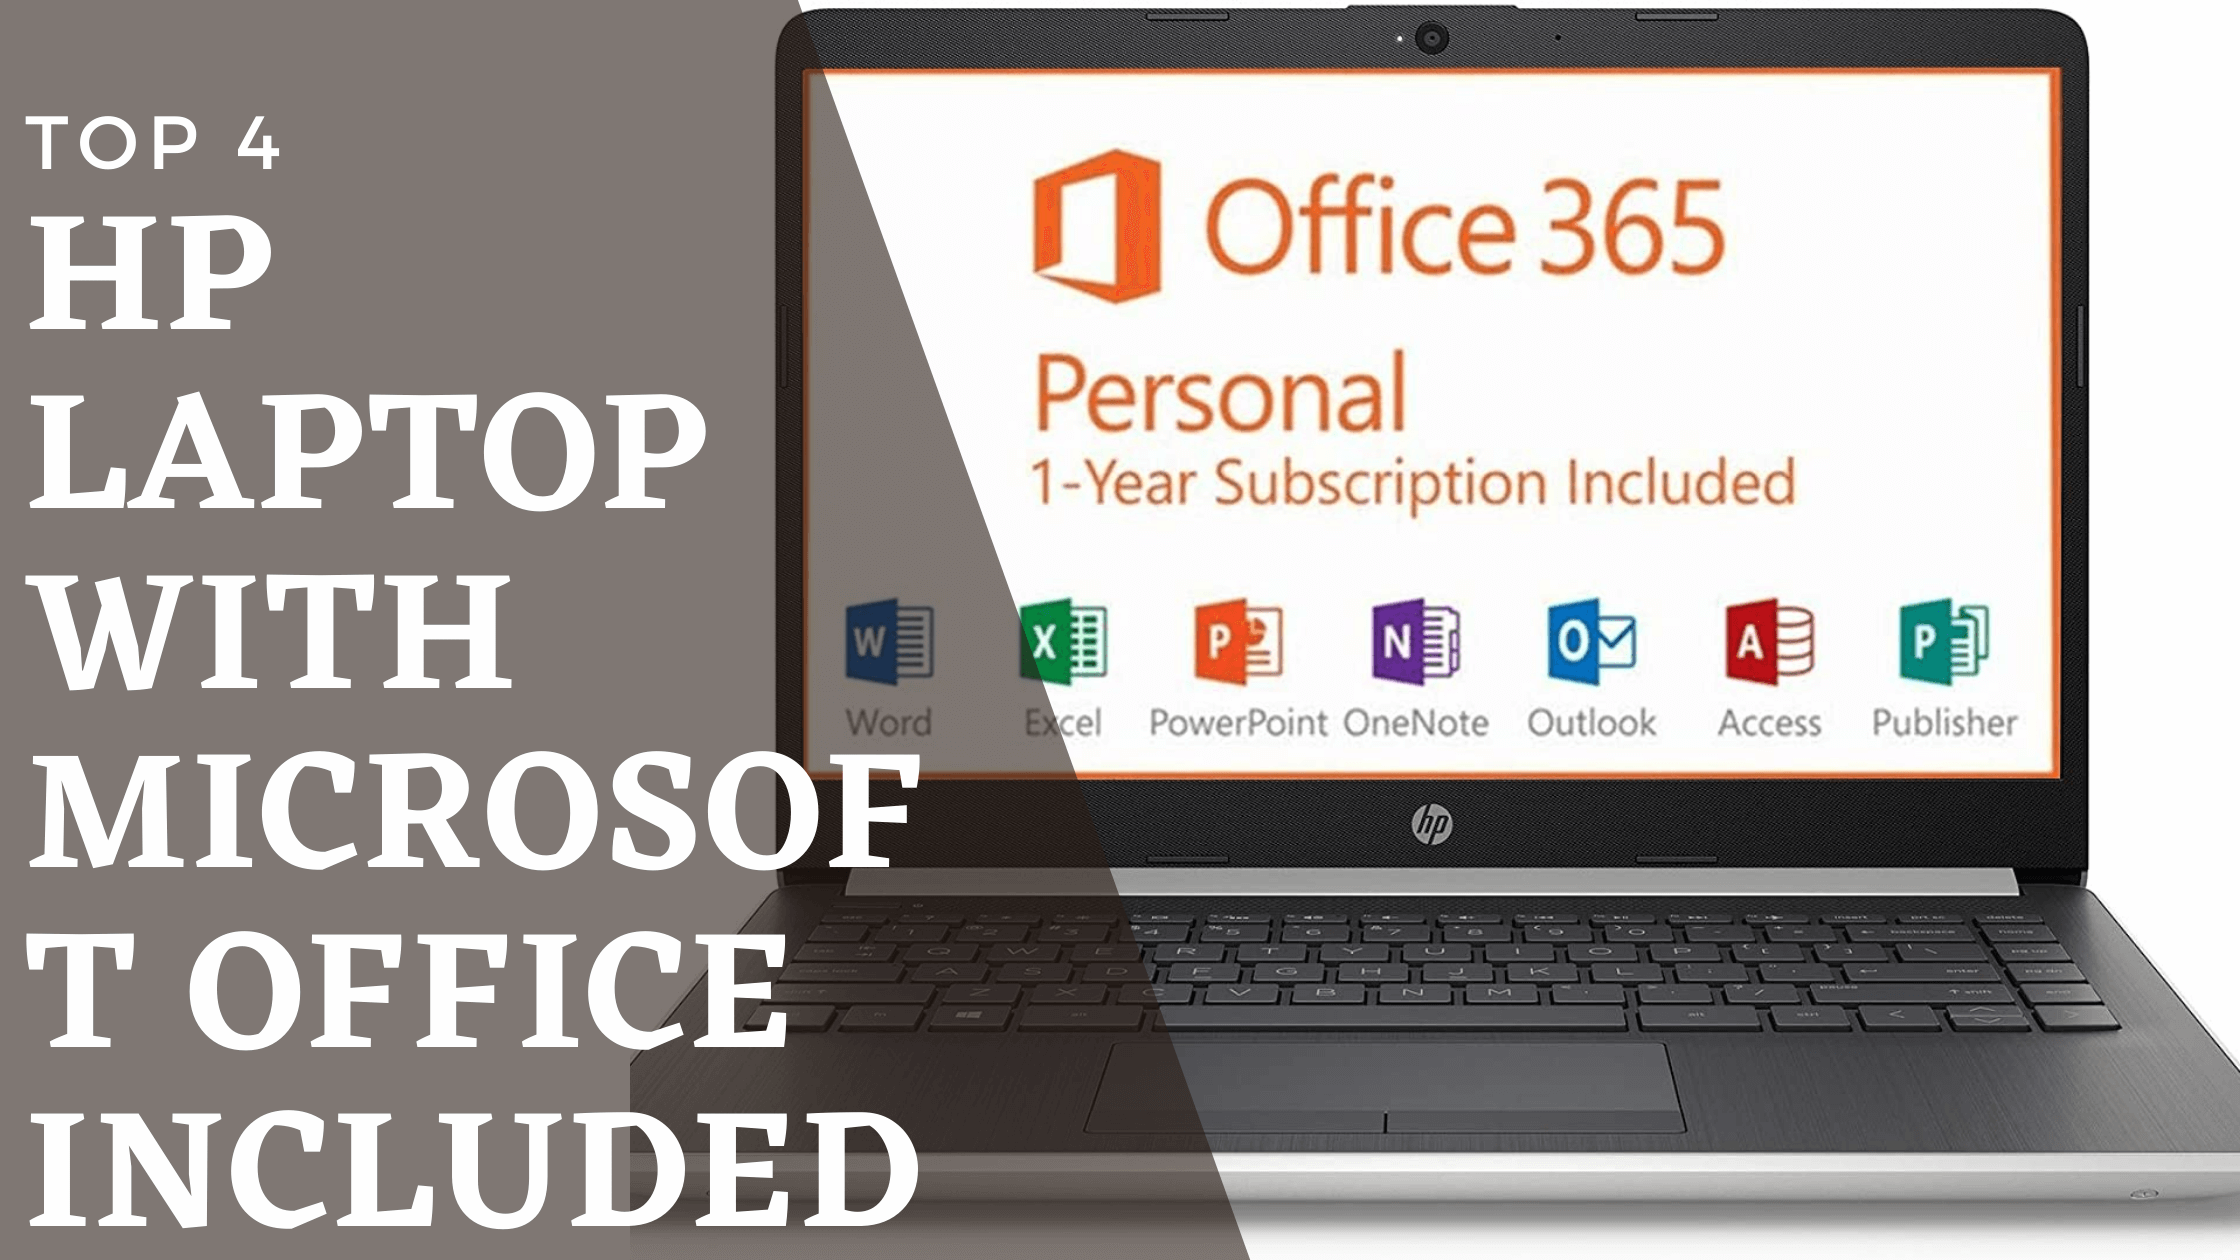 Top 4 HP Laptop With Microsoft Office Included